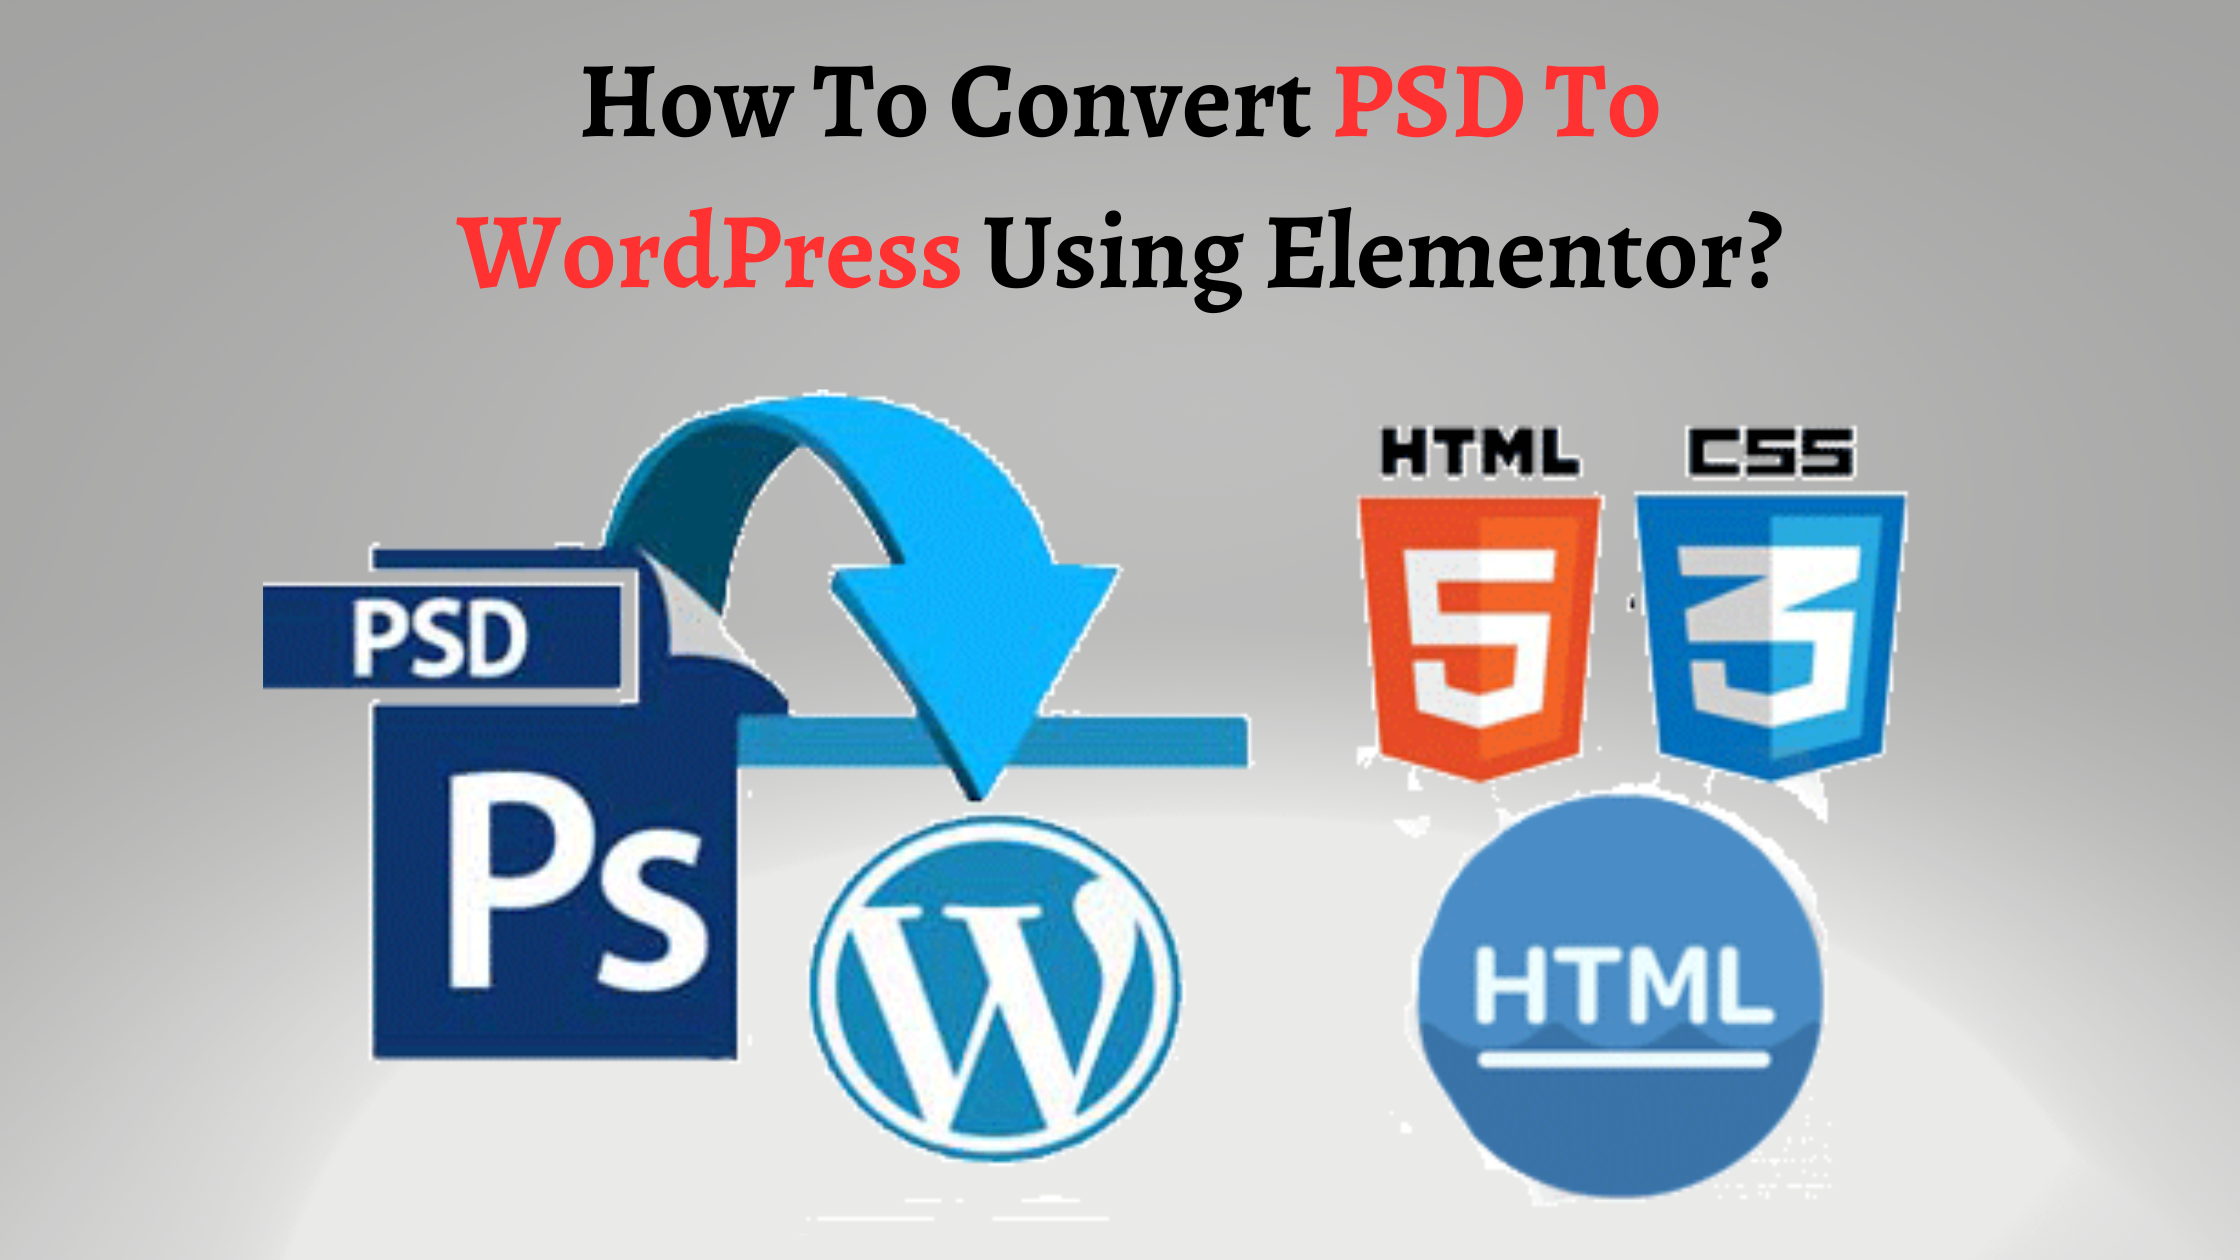 How To Convert PSD To WordPress Using Elementor?